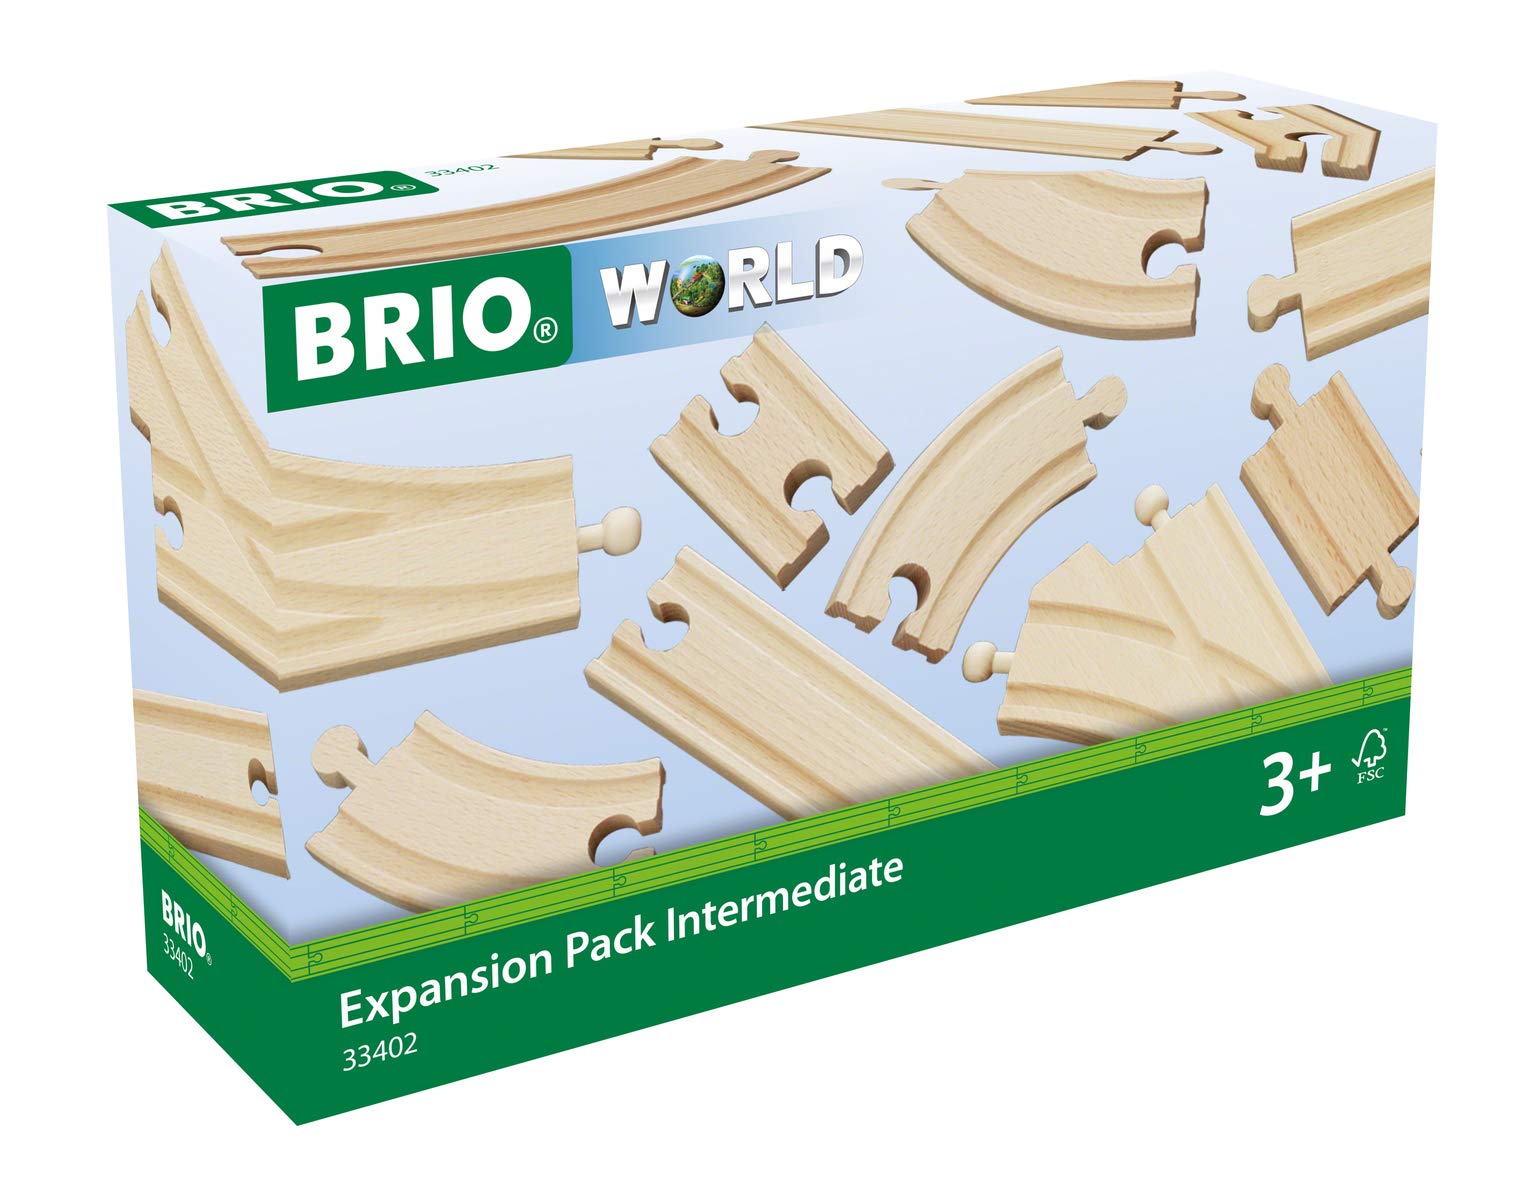 BRIO World 33402 Expansion Pack Intermediate | Wooden Train Tracks for Kids Age 3 and Up